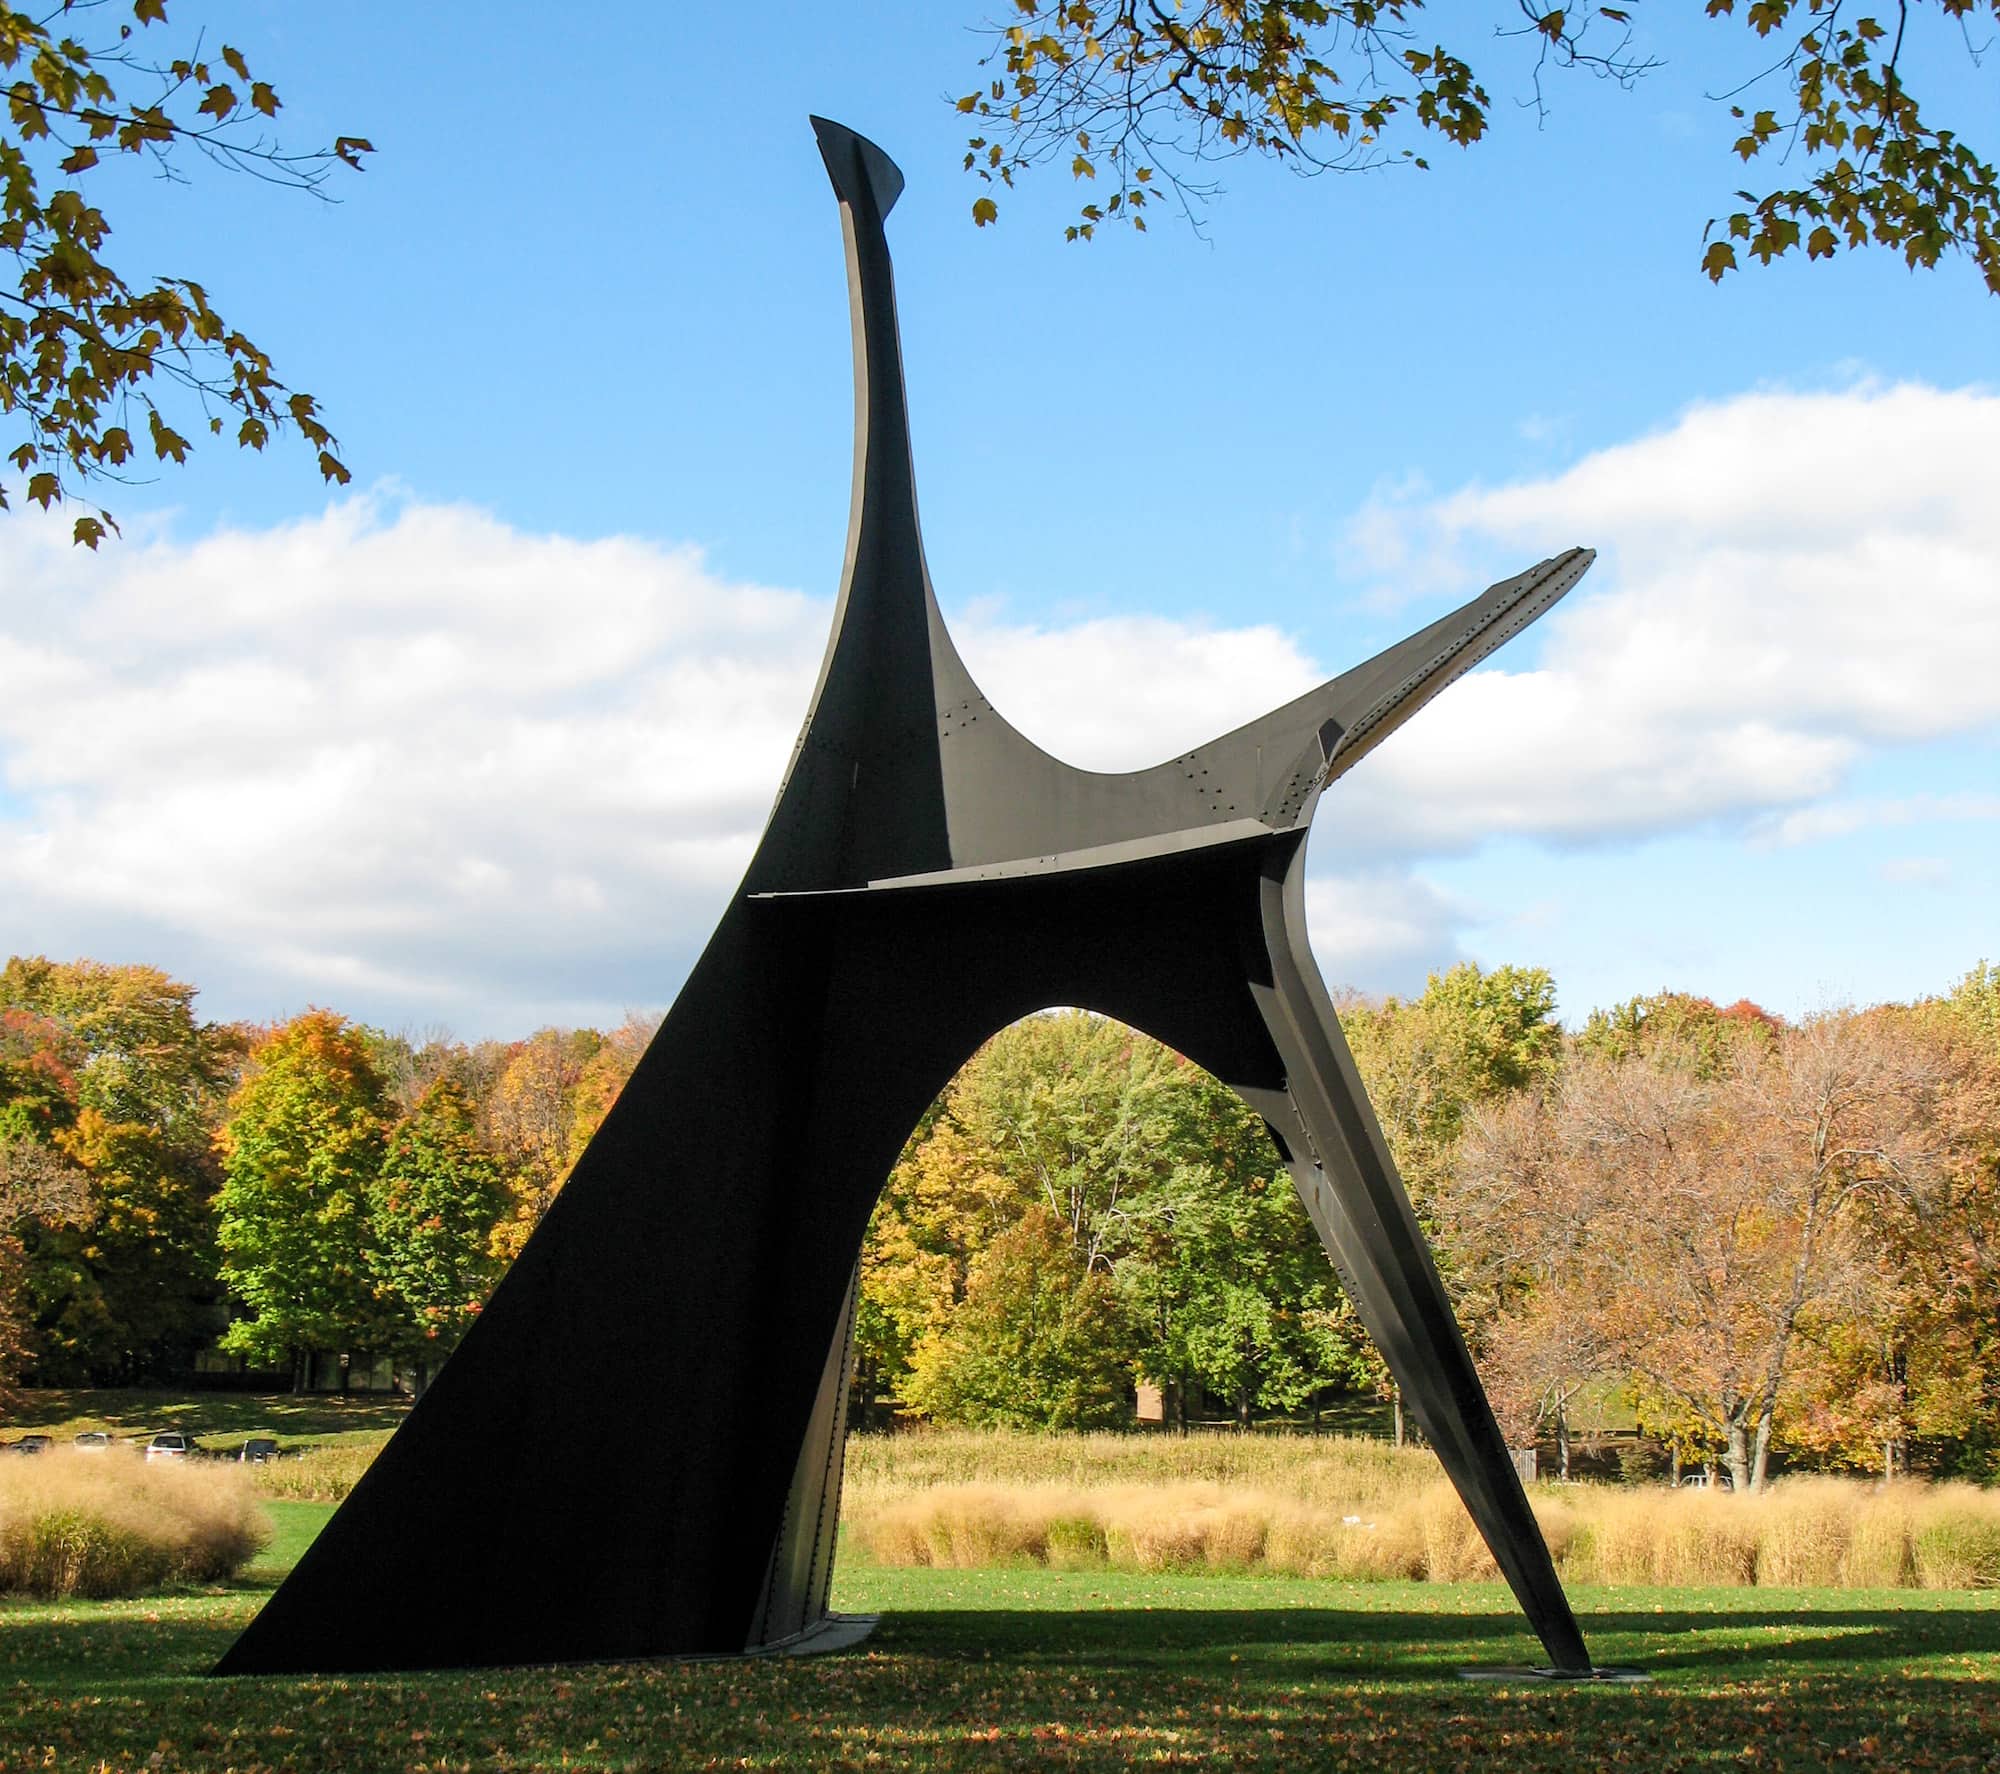 A large, abstract sculpture made of curved metal sits in the middle of a natural area during the fall, with orange trees behind it.